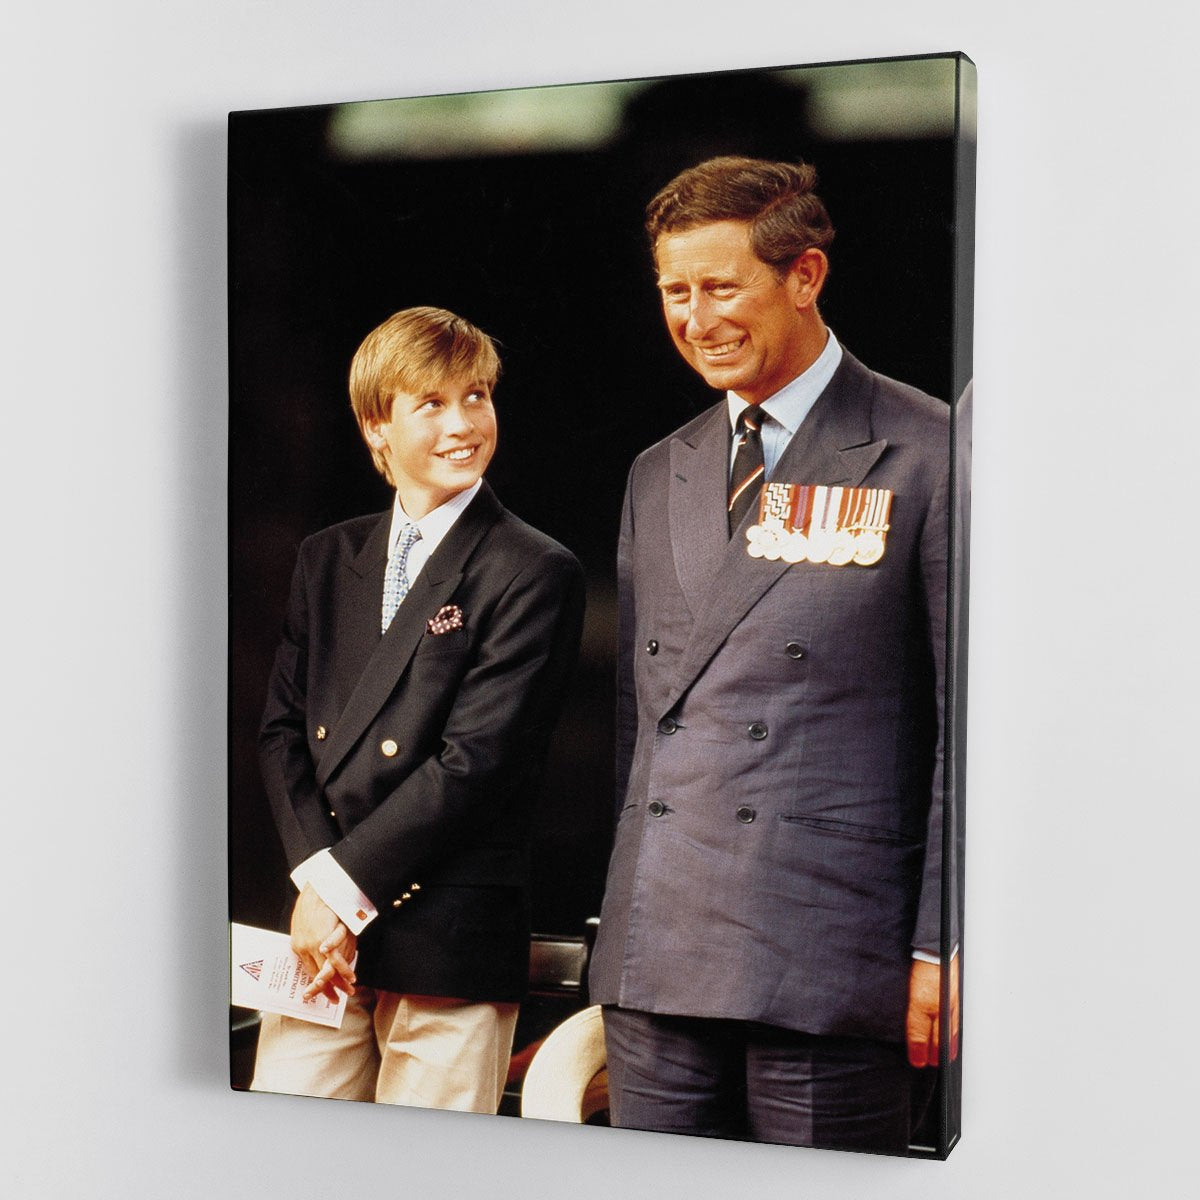 Prince William with Prince Charles at a VJ Parade Canvas Print or Poster